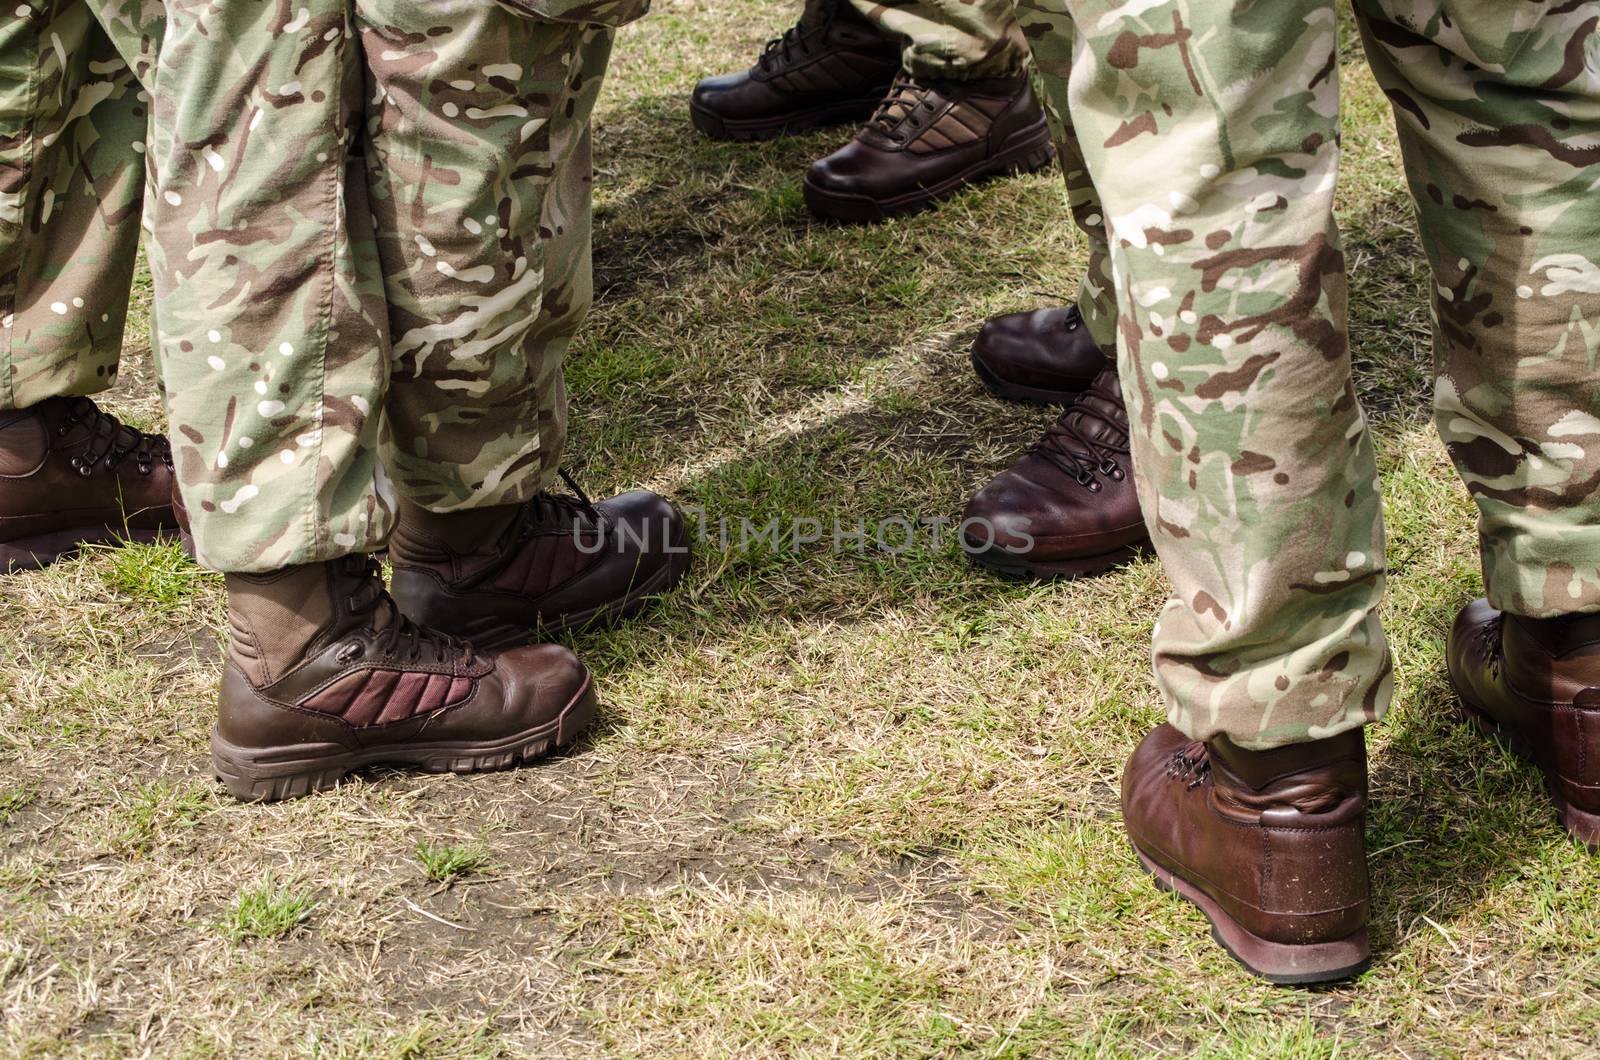 British soldiers' boots by BasPhoto